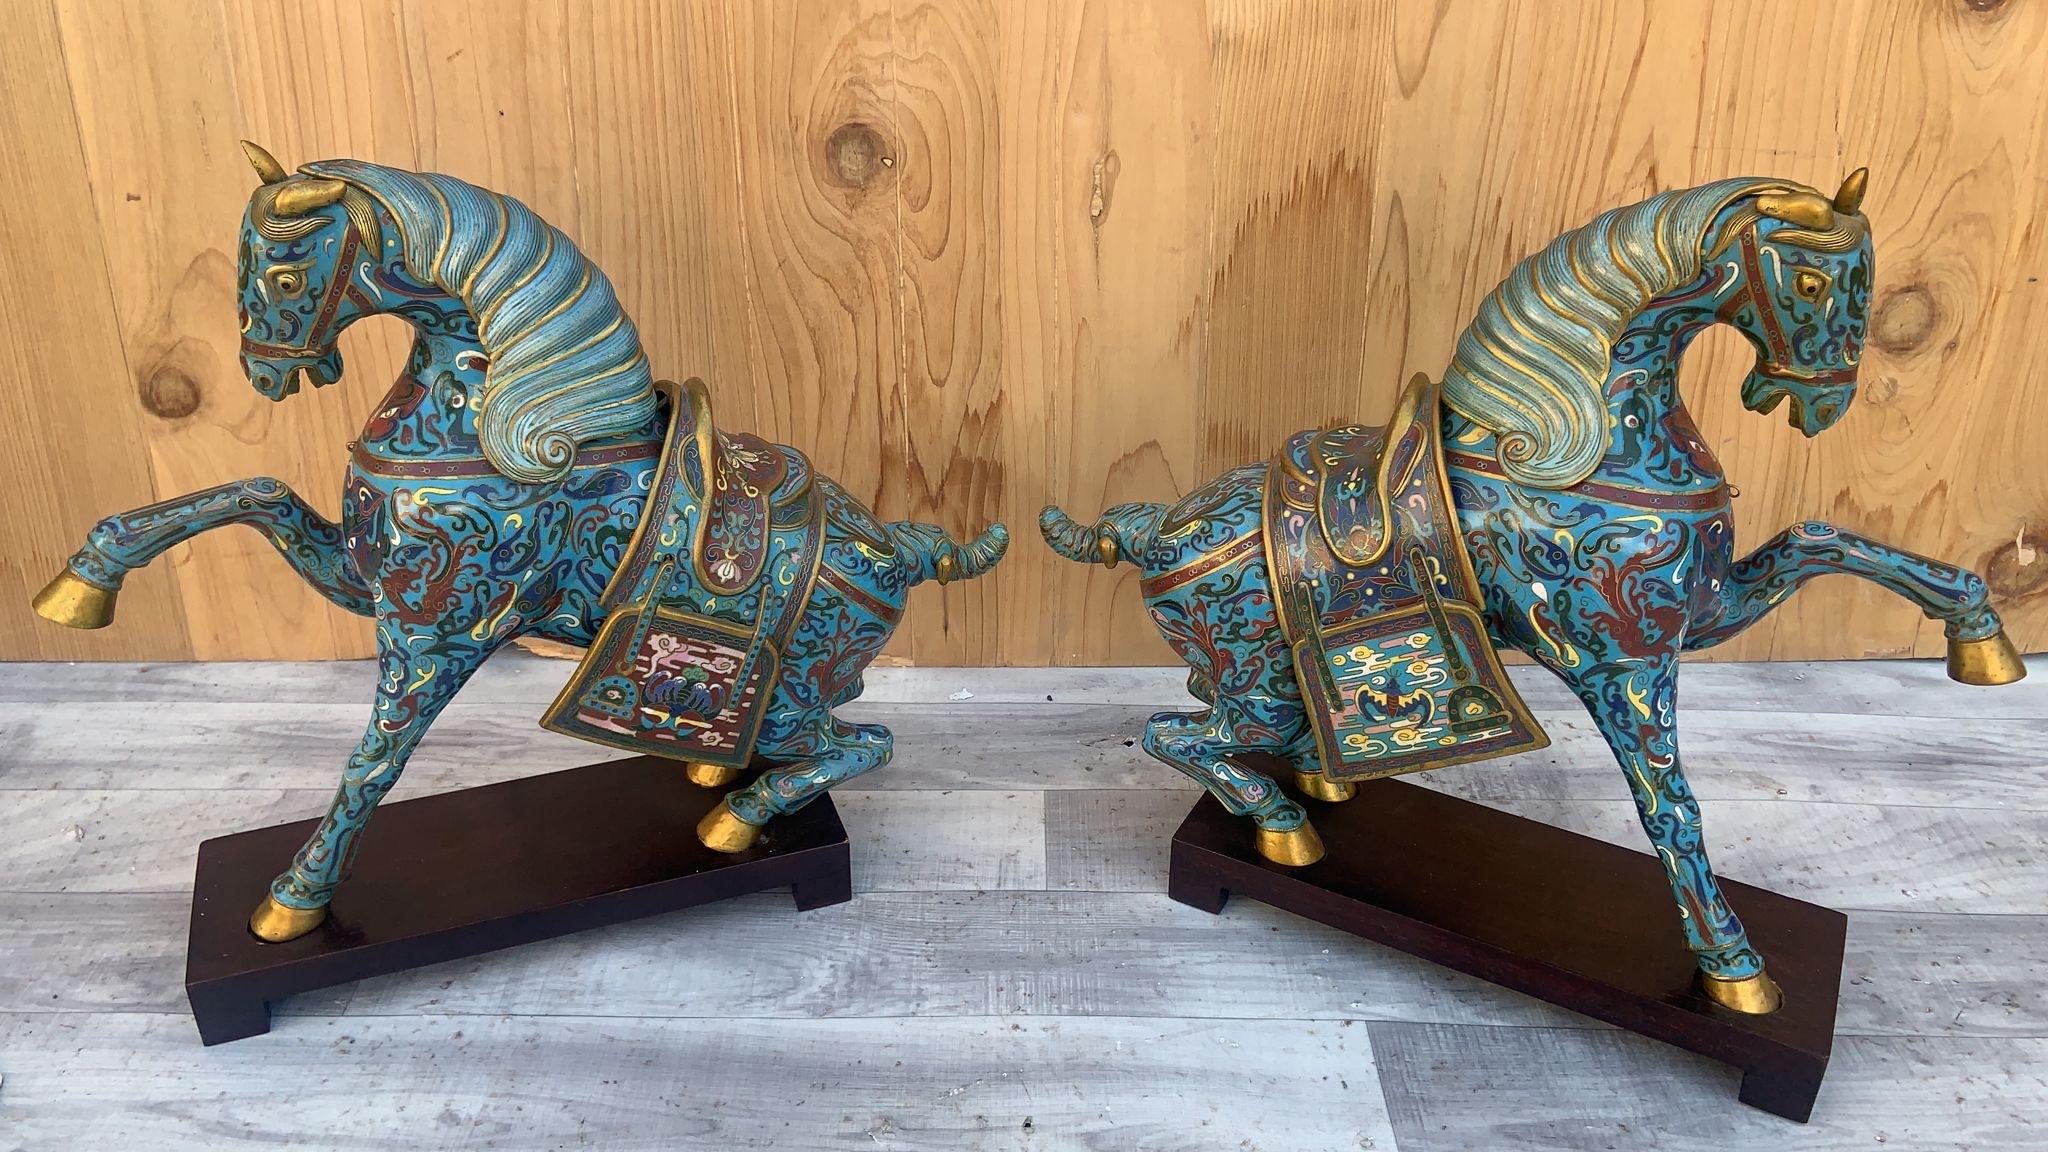 Vintage Chinese Cloisonné War Horse Sculptures on Mahogany Base - Pair For Sale 4